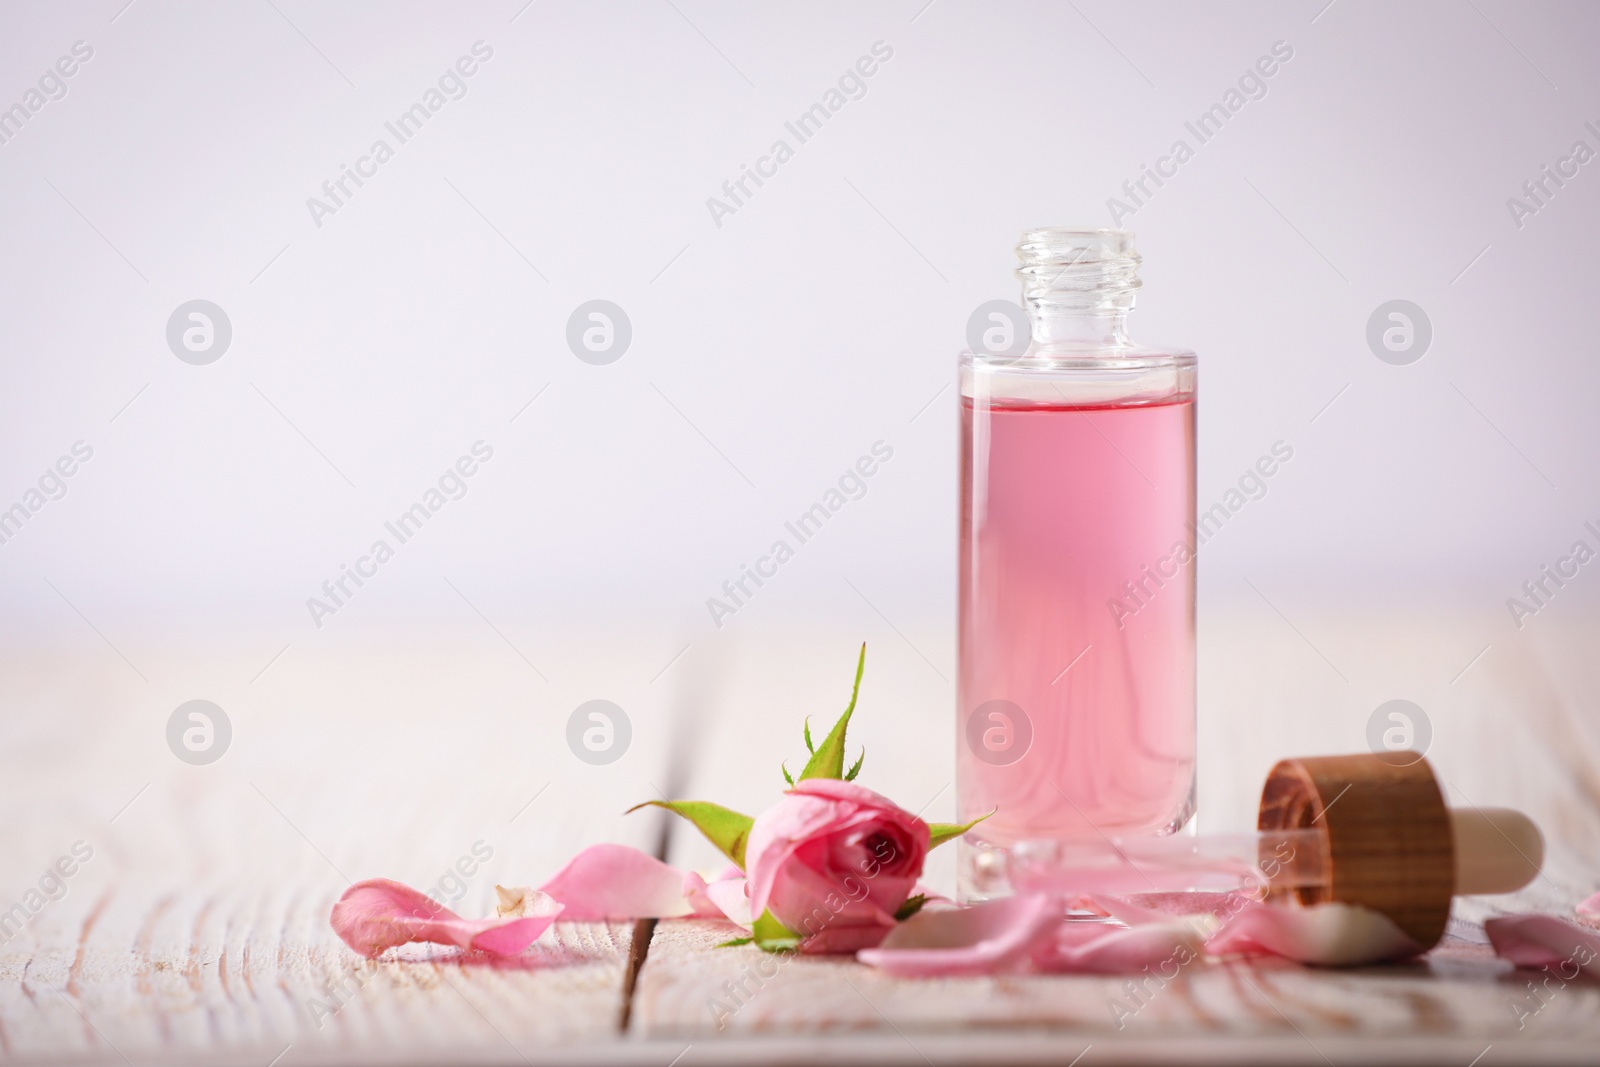 Photo of Bottle of essential rose oil and flowers on white wooden table against light background. Space for text